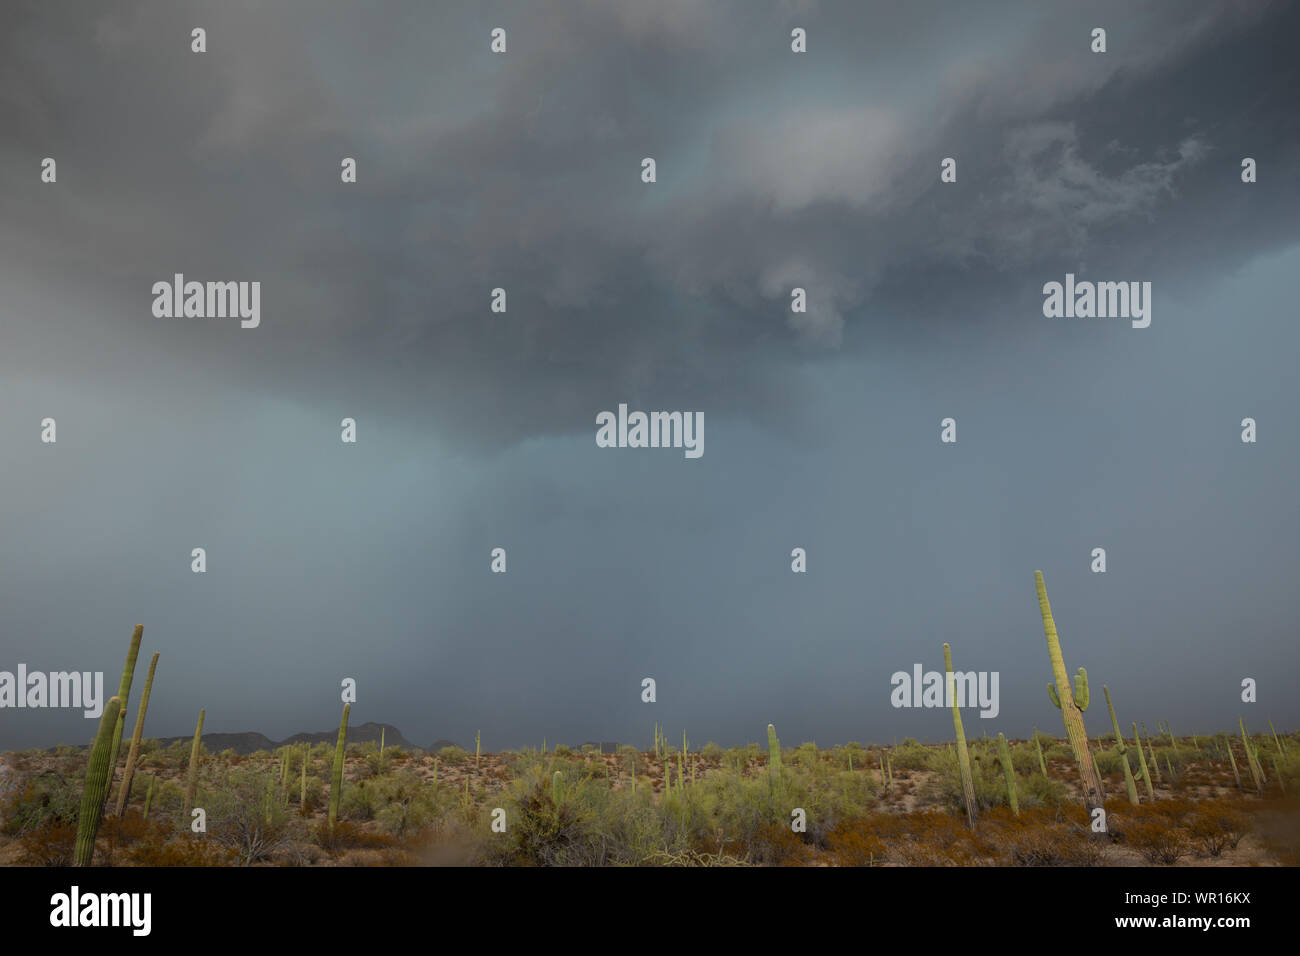 Ominous and low-handing dark clouds approach saguaro cactus ahead of a monsoon thunderstorm in Organ Pipe Cactus National Monument, Pima County, Arizo Stock Photo